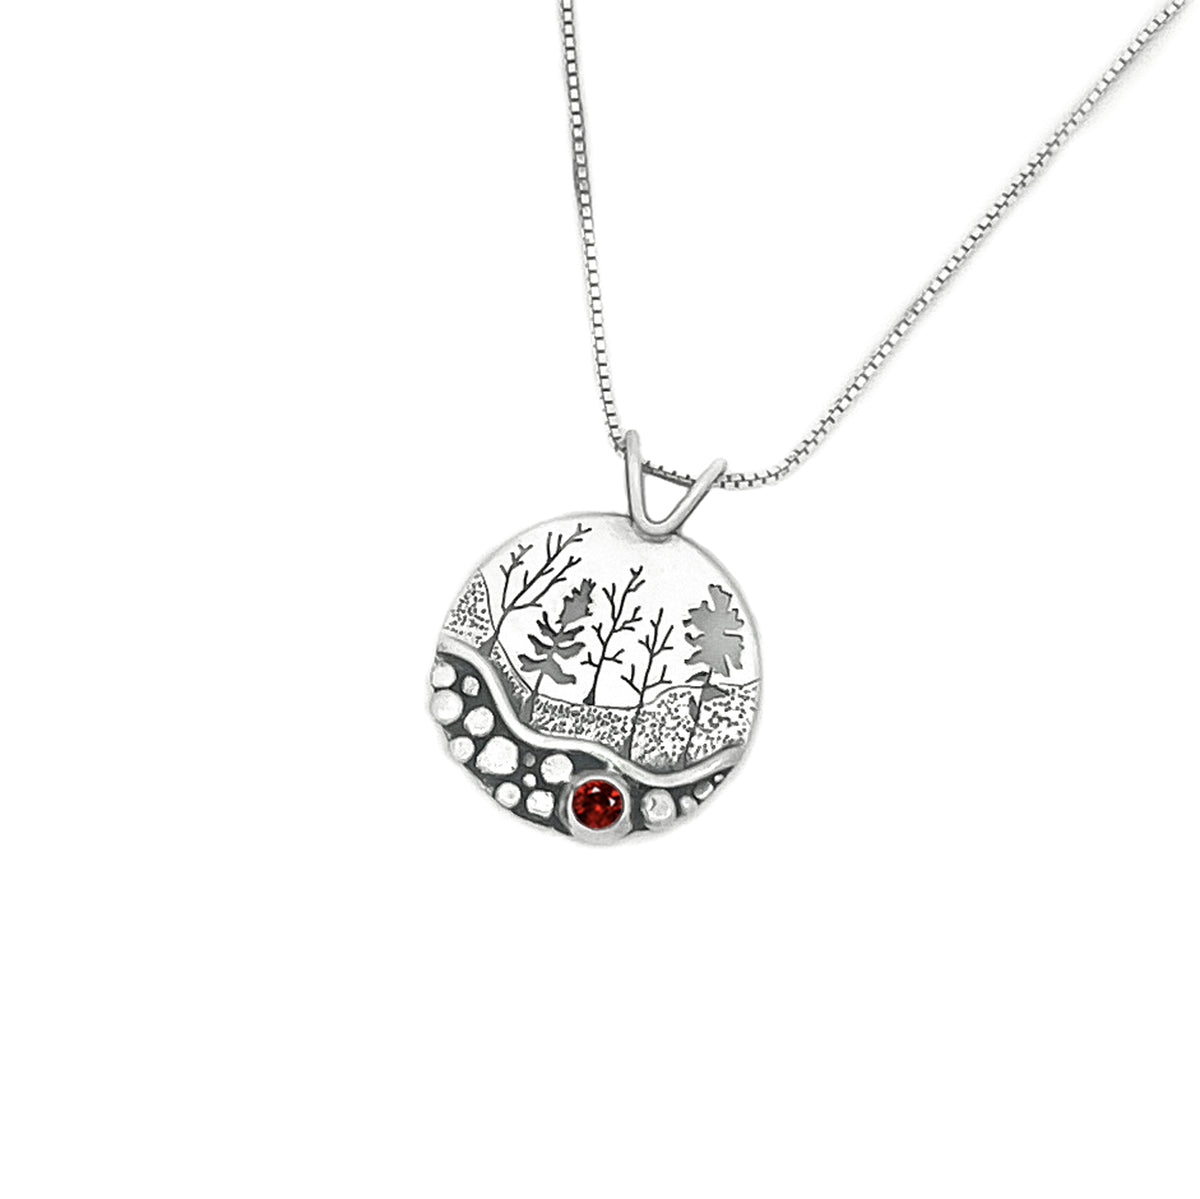 Silver Pebble Forest Birthstone Pendant - your choice of 4mm stone - Silver Pendant July - Lab Created Ruby January - Idaho Garnet 7256 - handmade by Beth Millner Jewelry